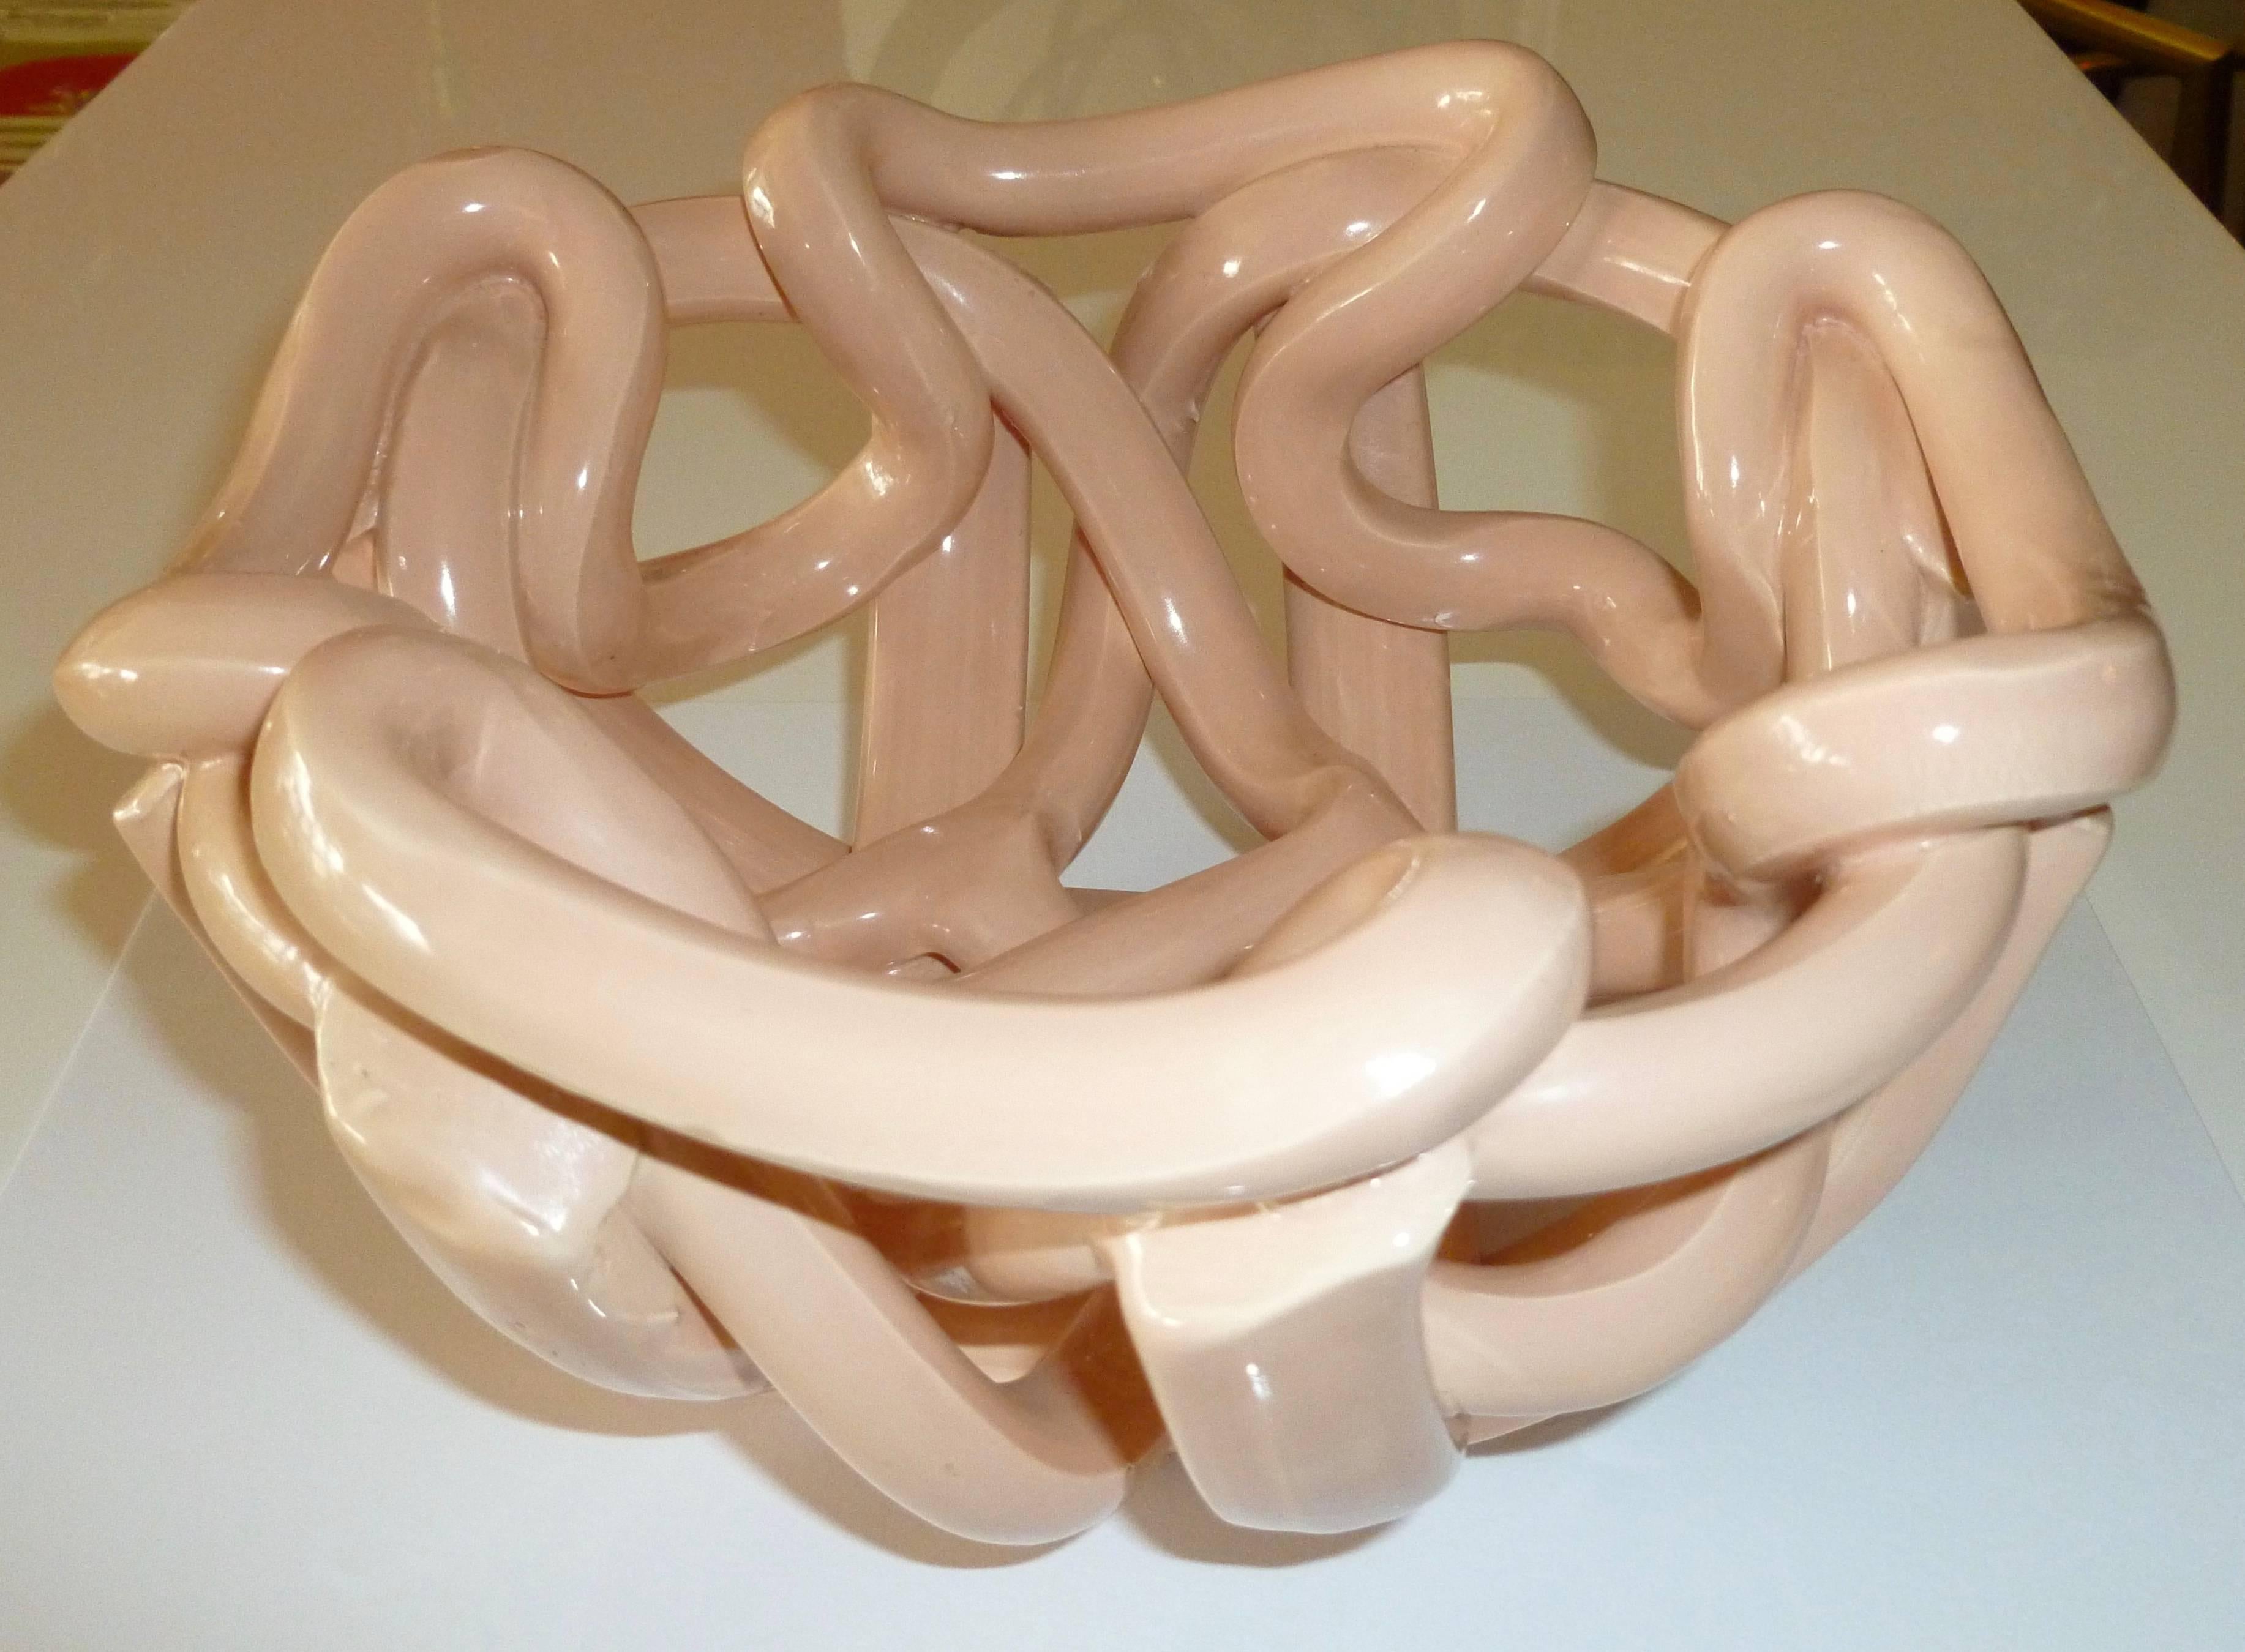 Intertwined ropes of ceramic make up this sculptural vintage bowl. The color is one of a peachy pink. Sorry the photos do not do justice to the lovely nature of this bowl. The color is unusual. It is from the 70's.

NOTE: THIS WILL BE ON SALE FOR A